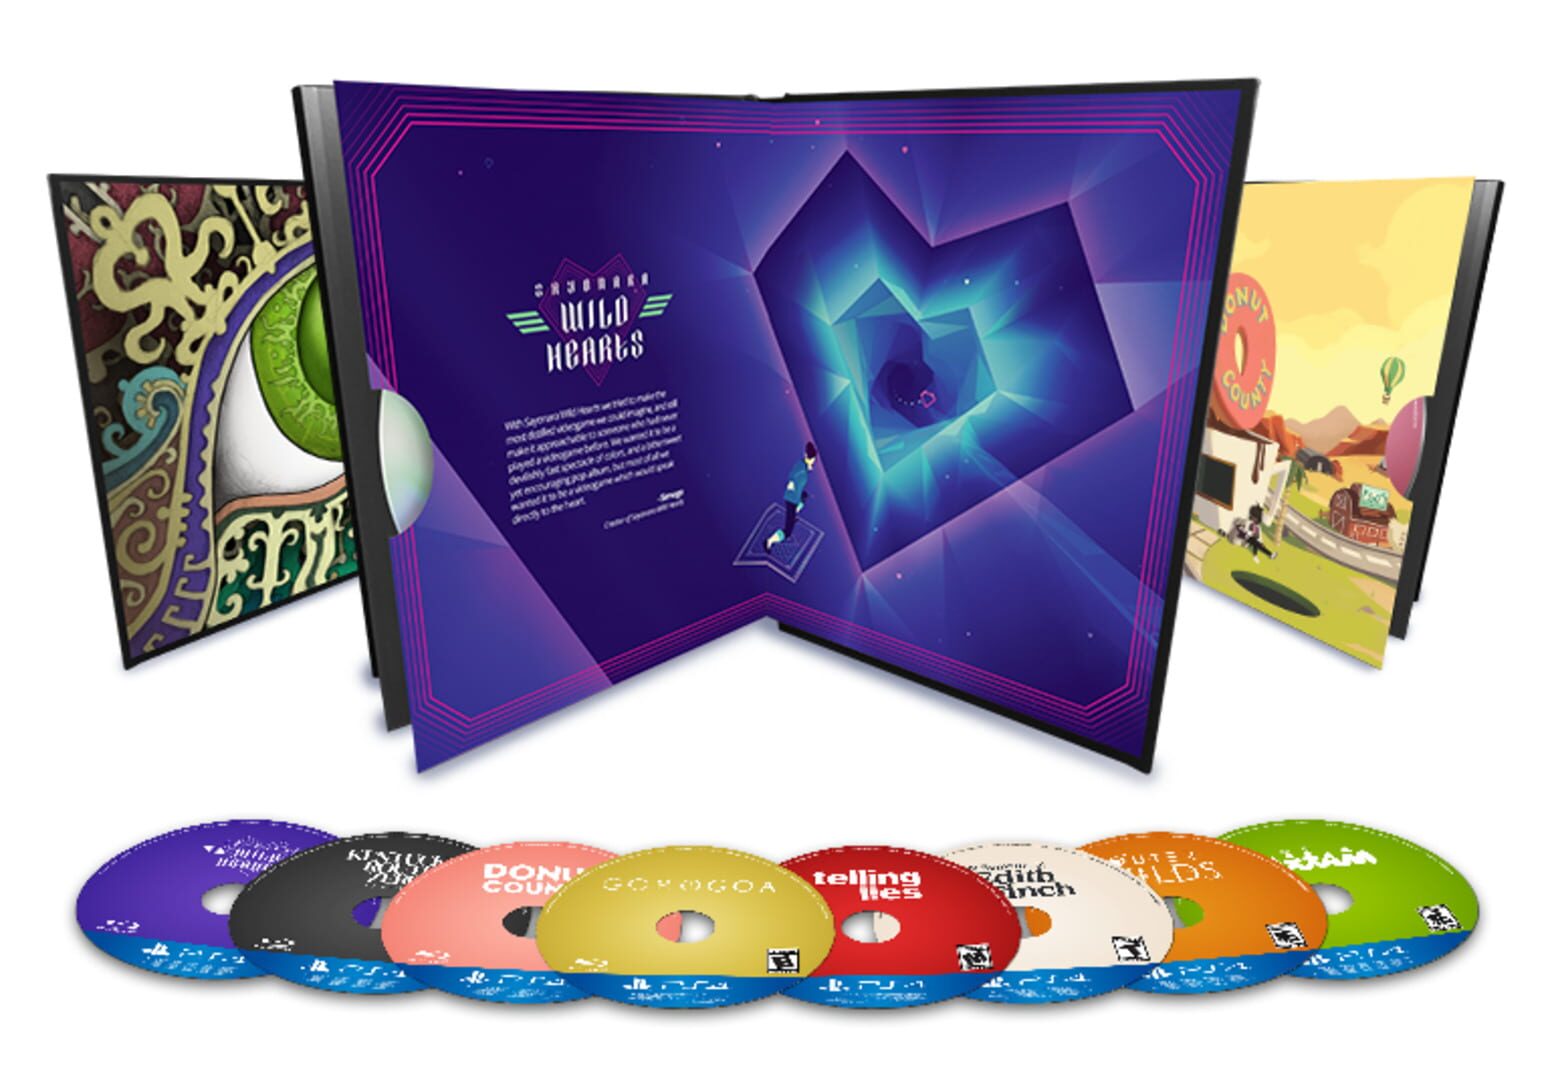 Annapurna Interactive Deluxe Limited Edition Image